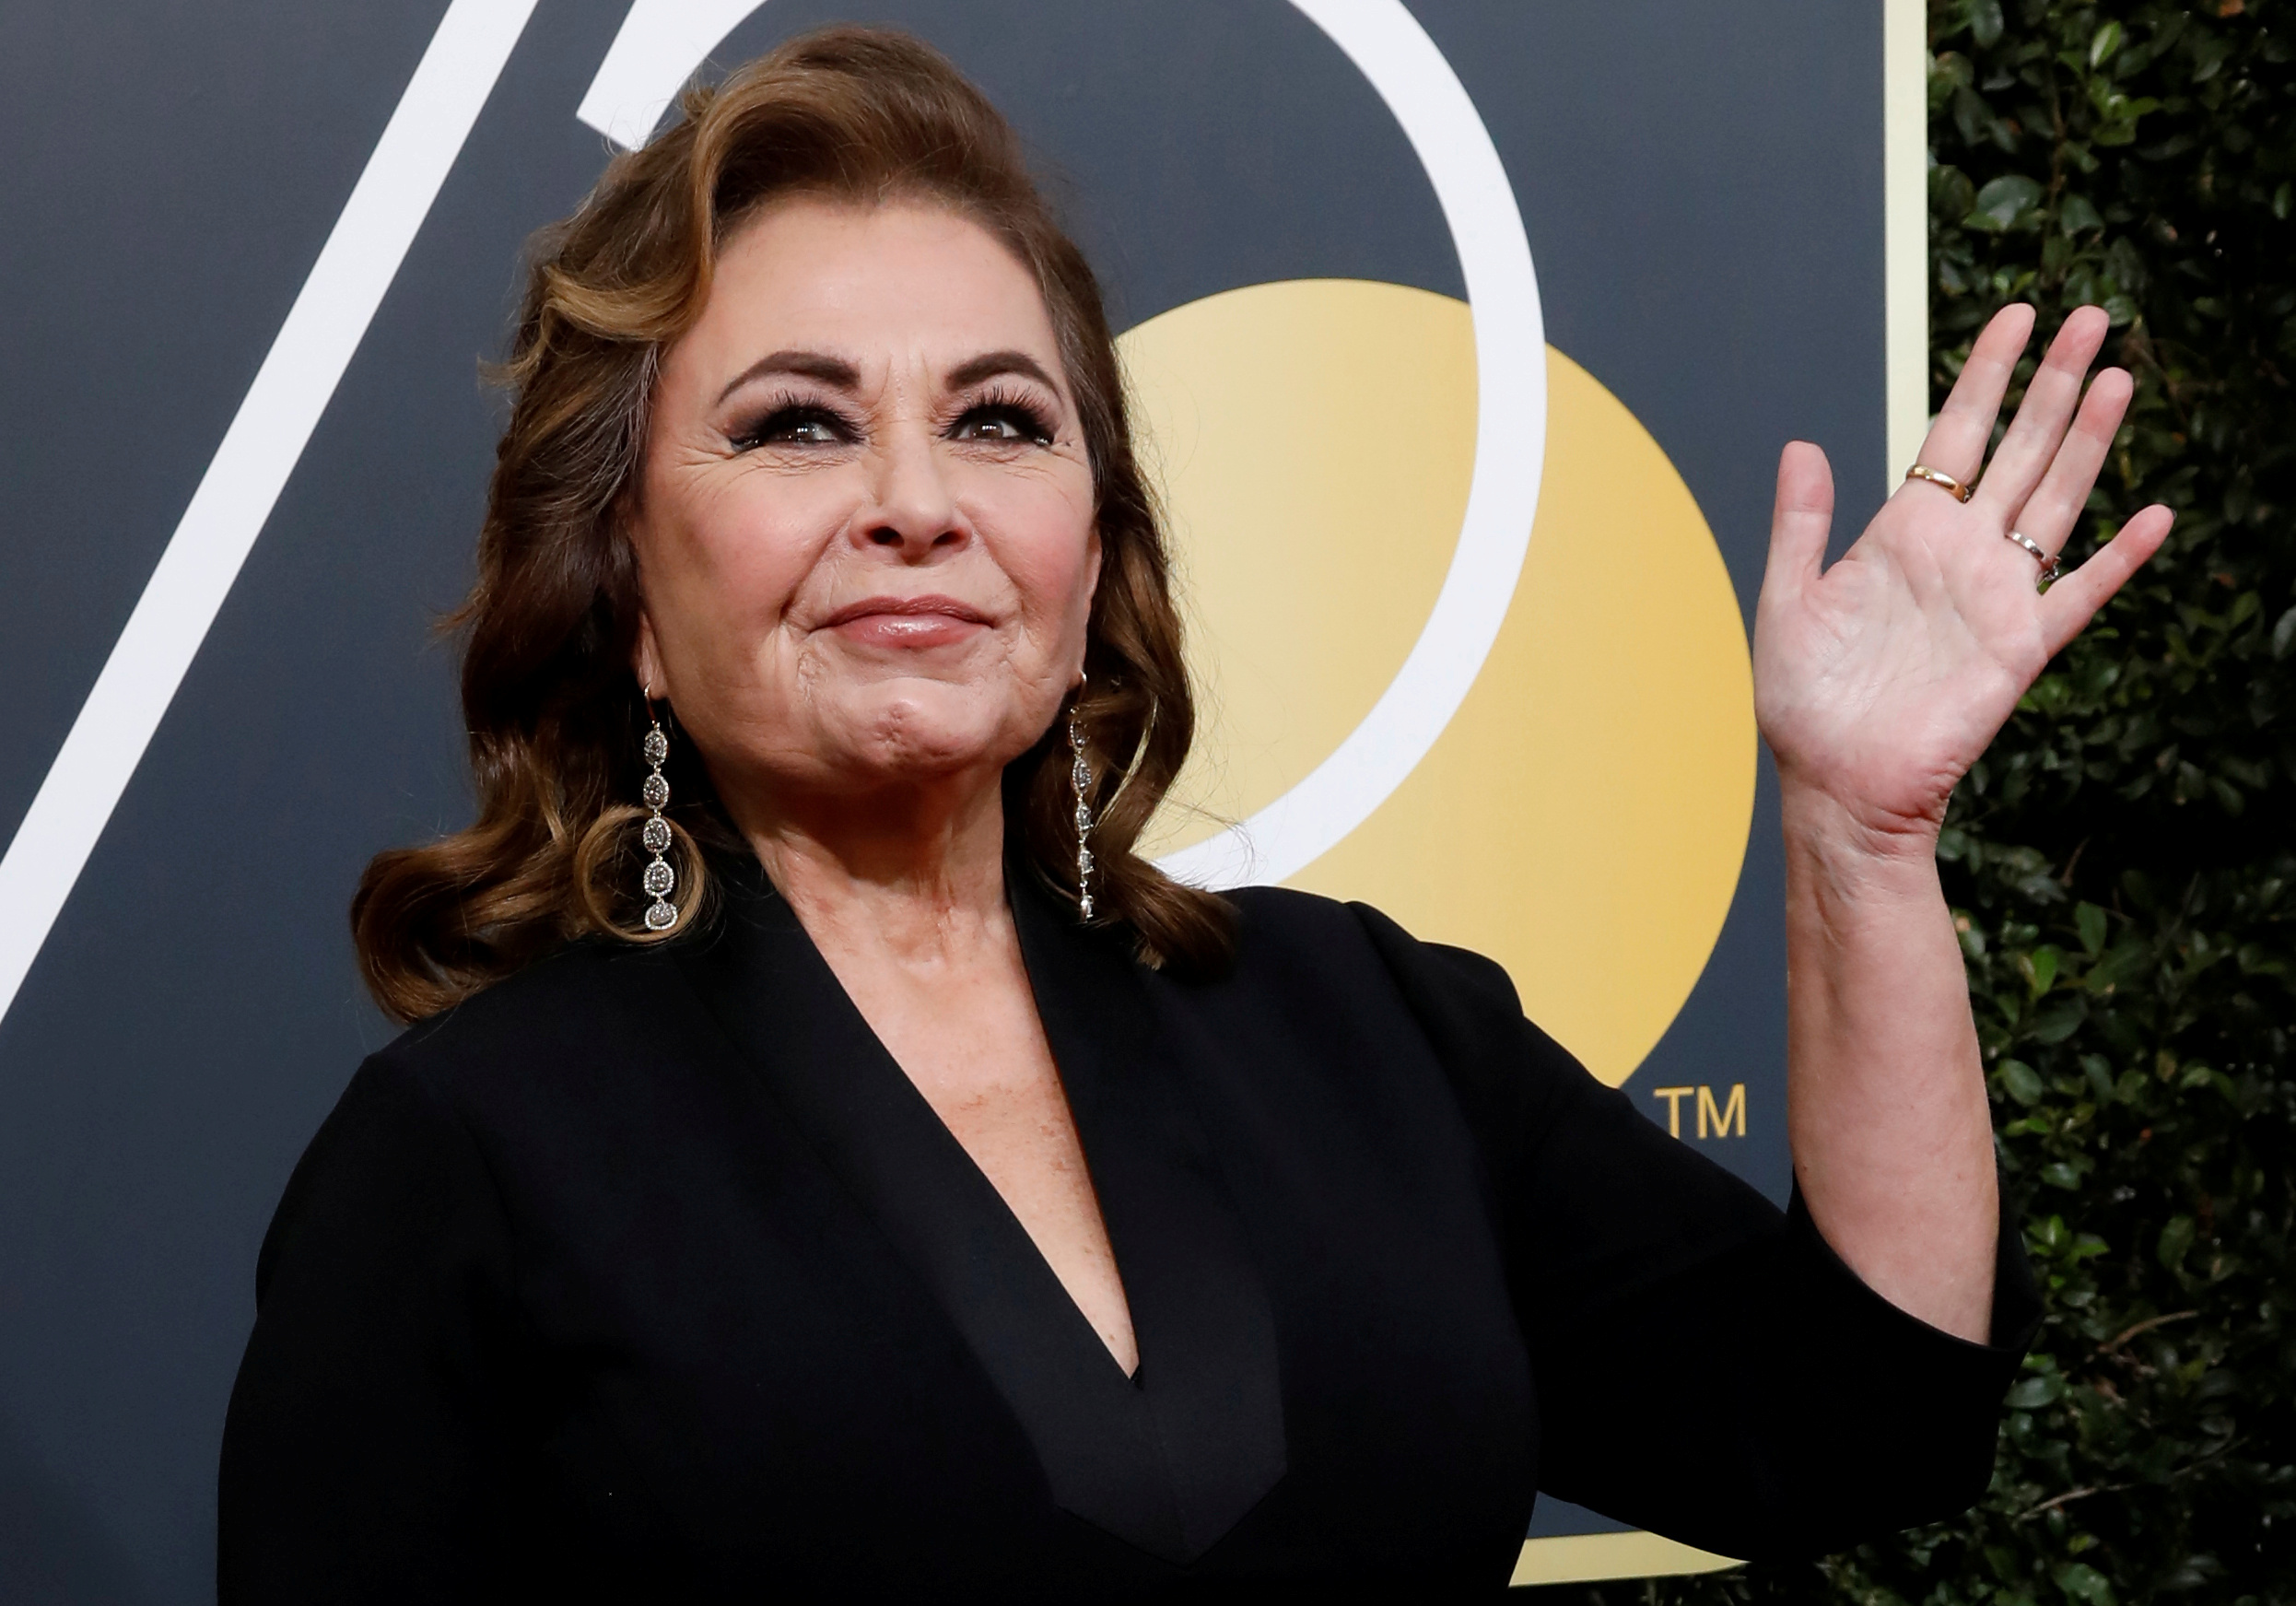 Actress Roseanne Barr waves on her arrival to the 75th Golden Globe Awards in Beverly Hills, Calif.,  on Jan. 7, 2018. (Mario Anzuoni—Reuters)